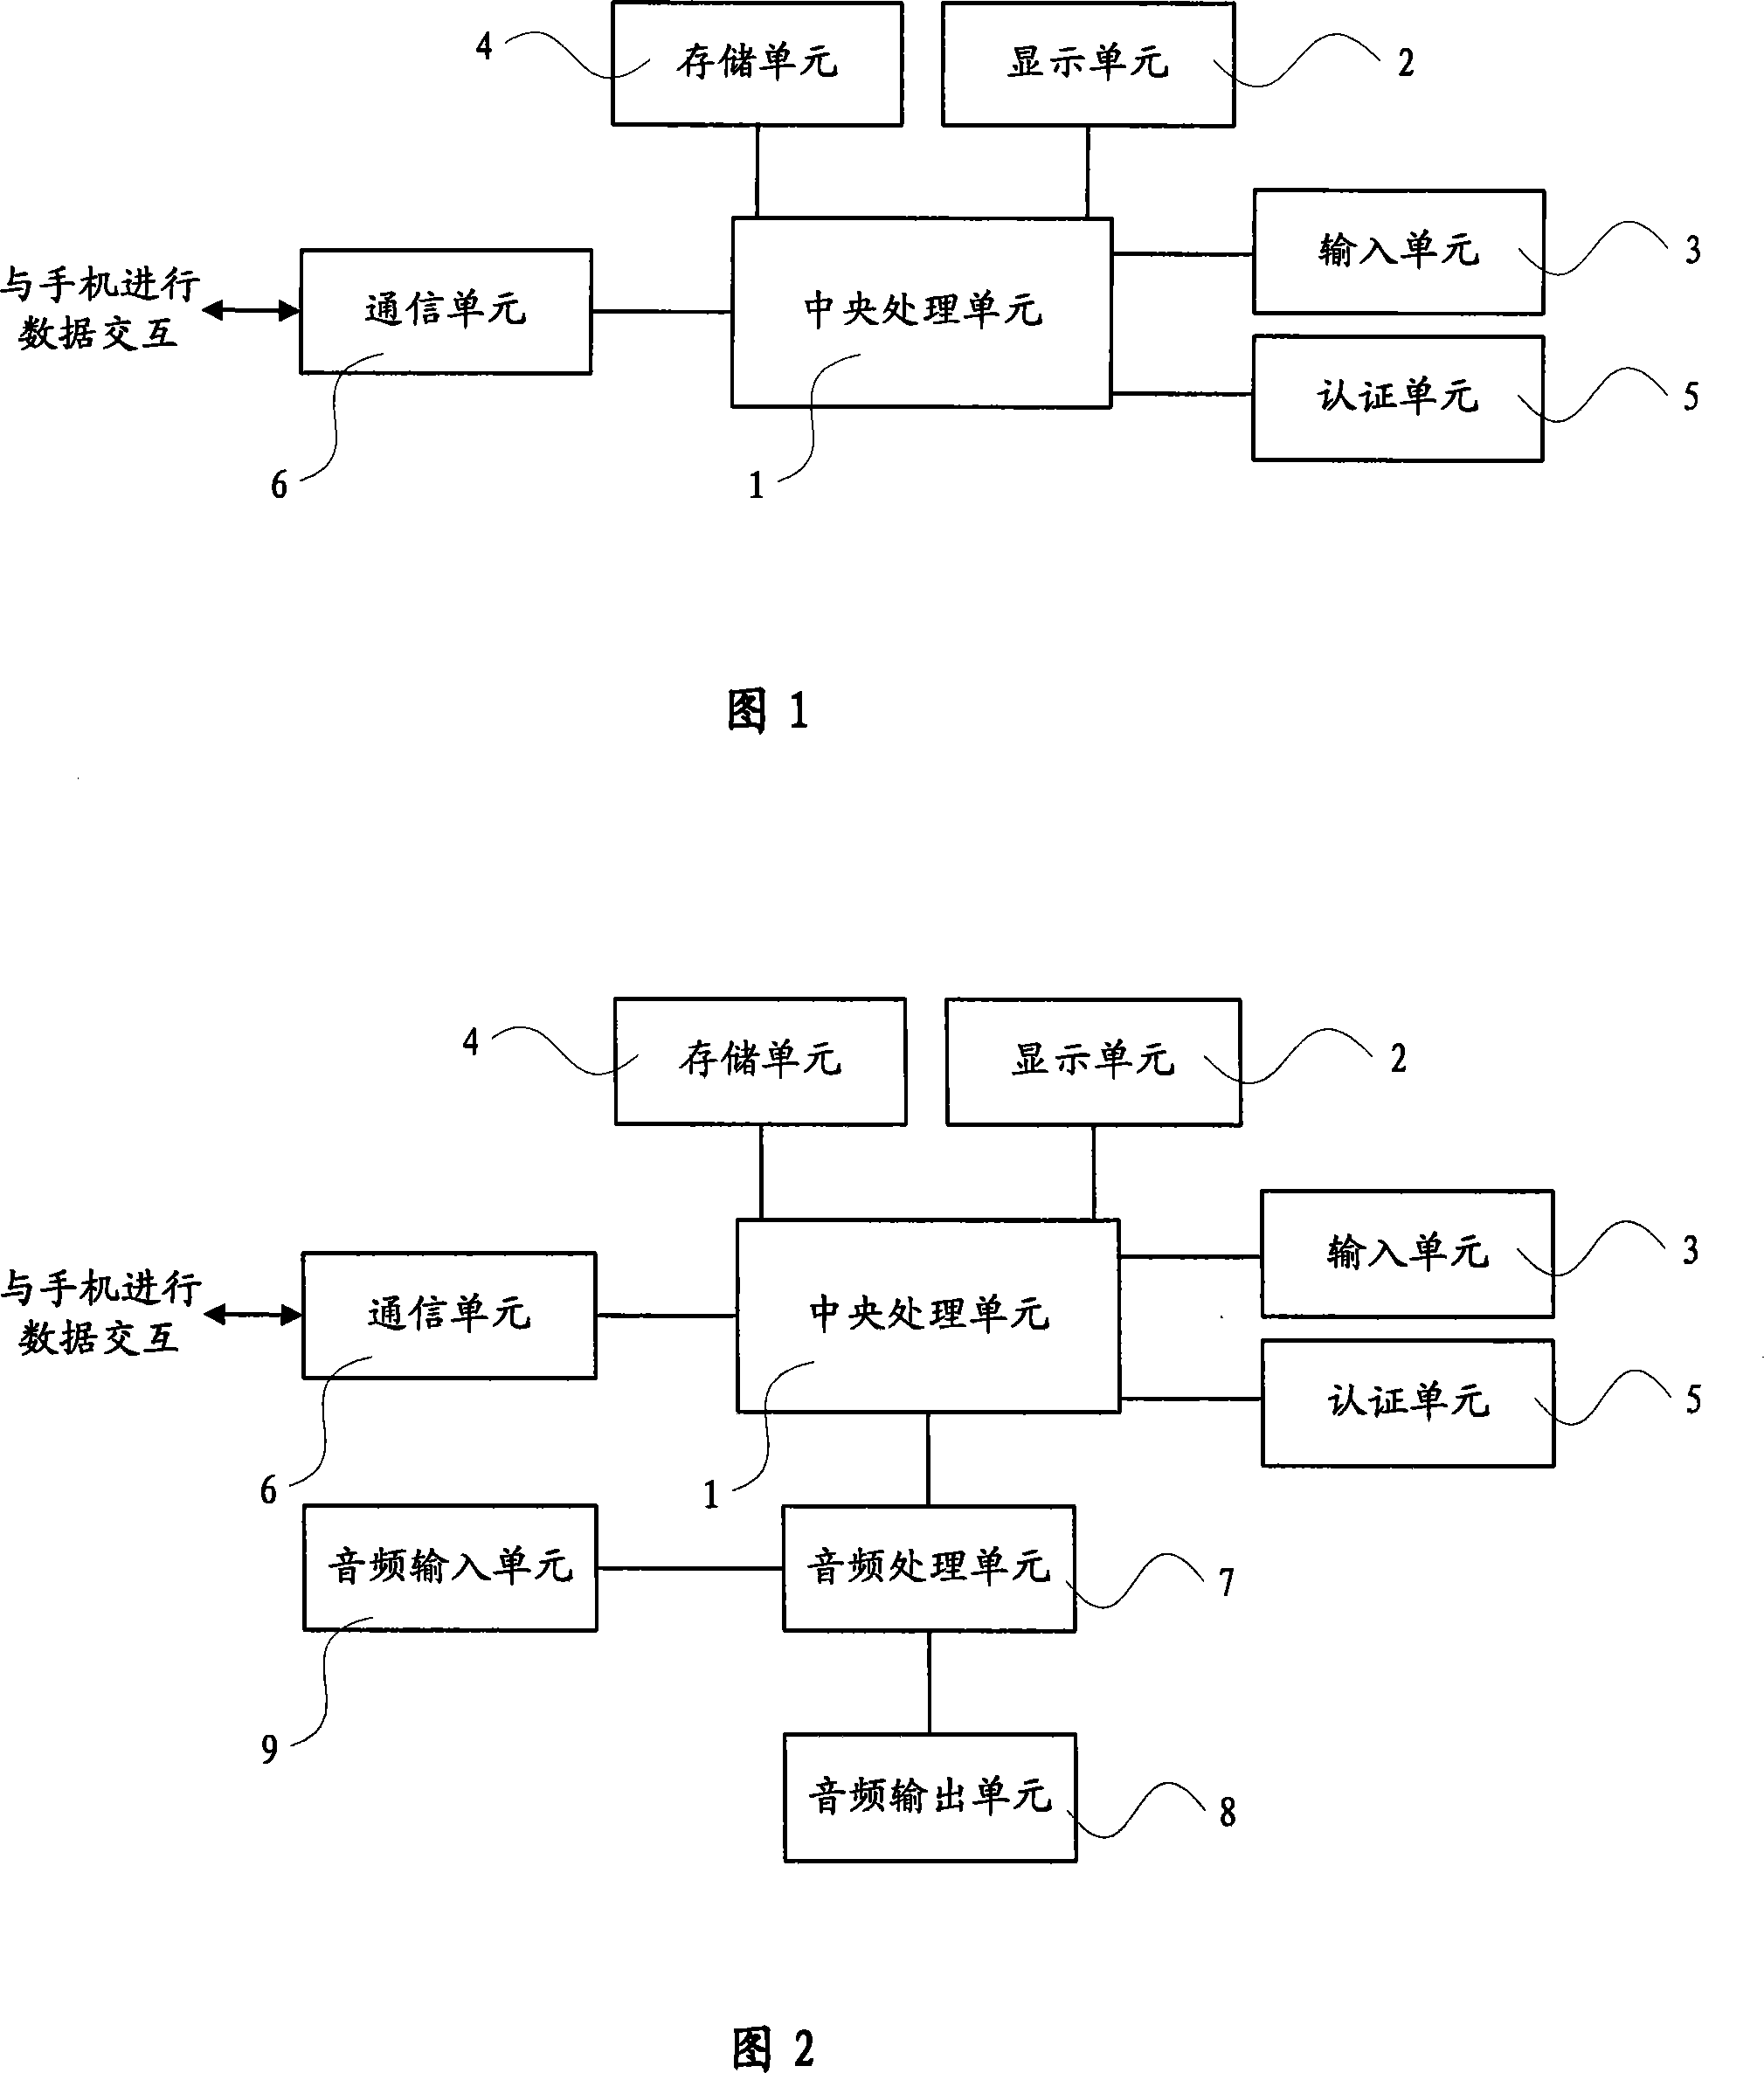 Apparatus and method for monitoring mobile phone state